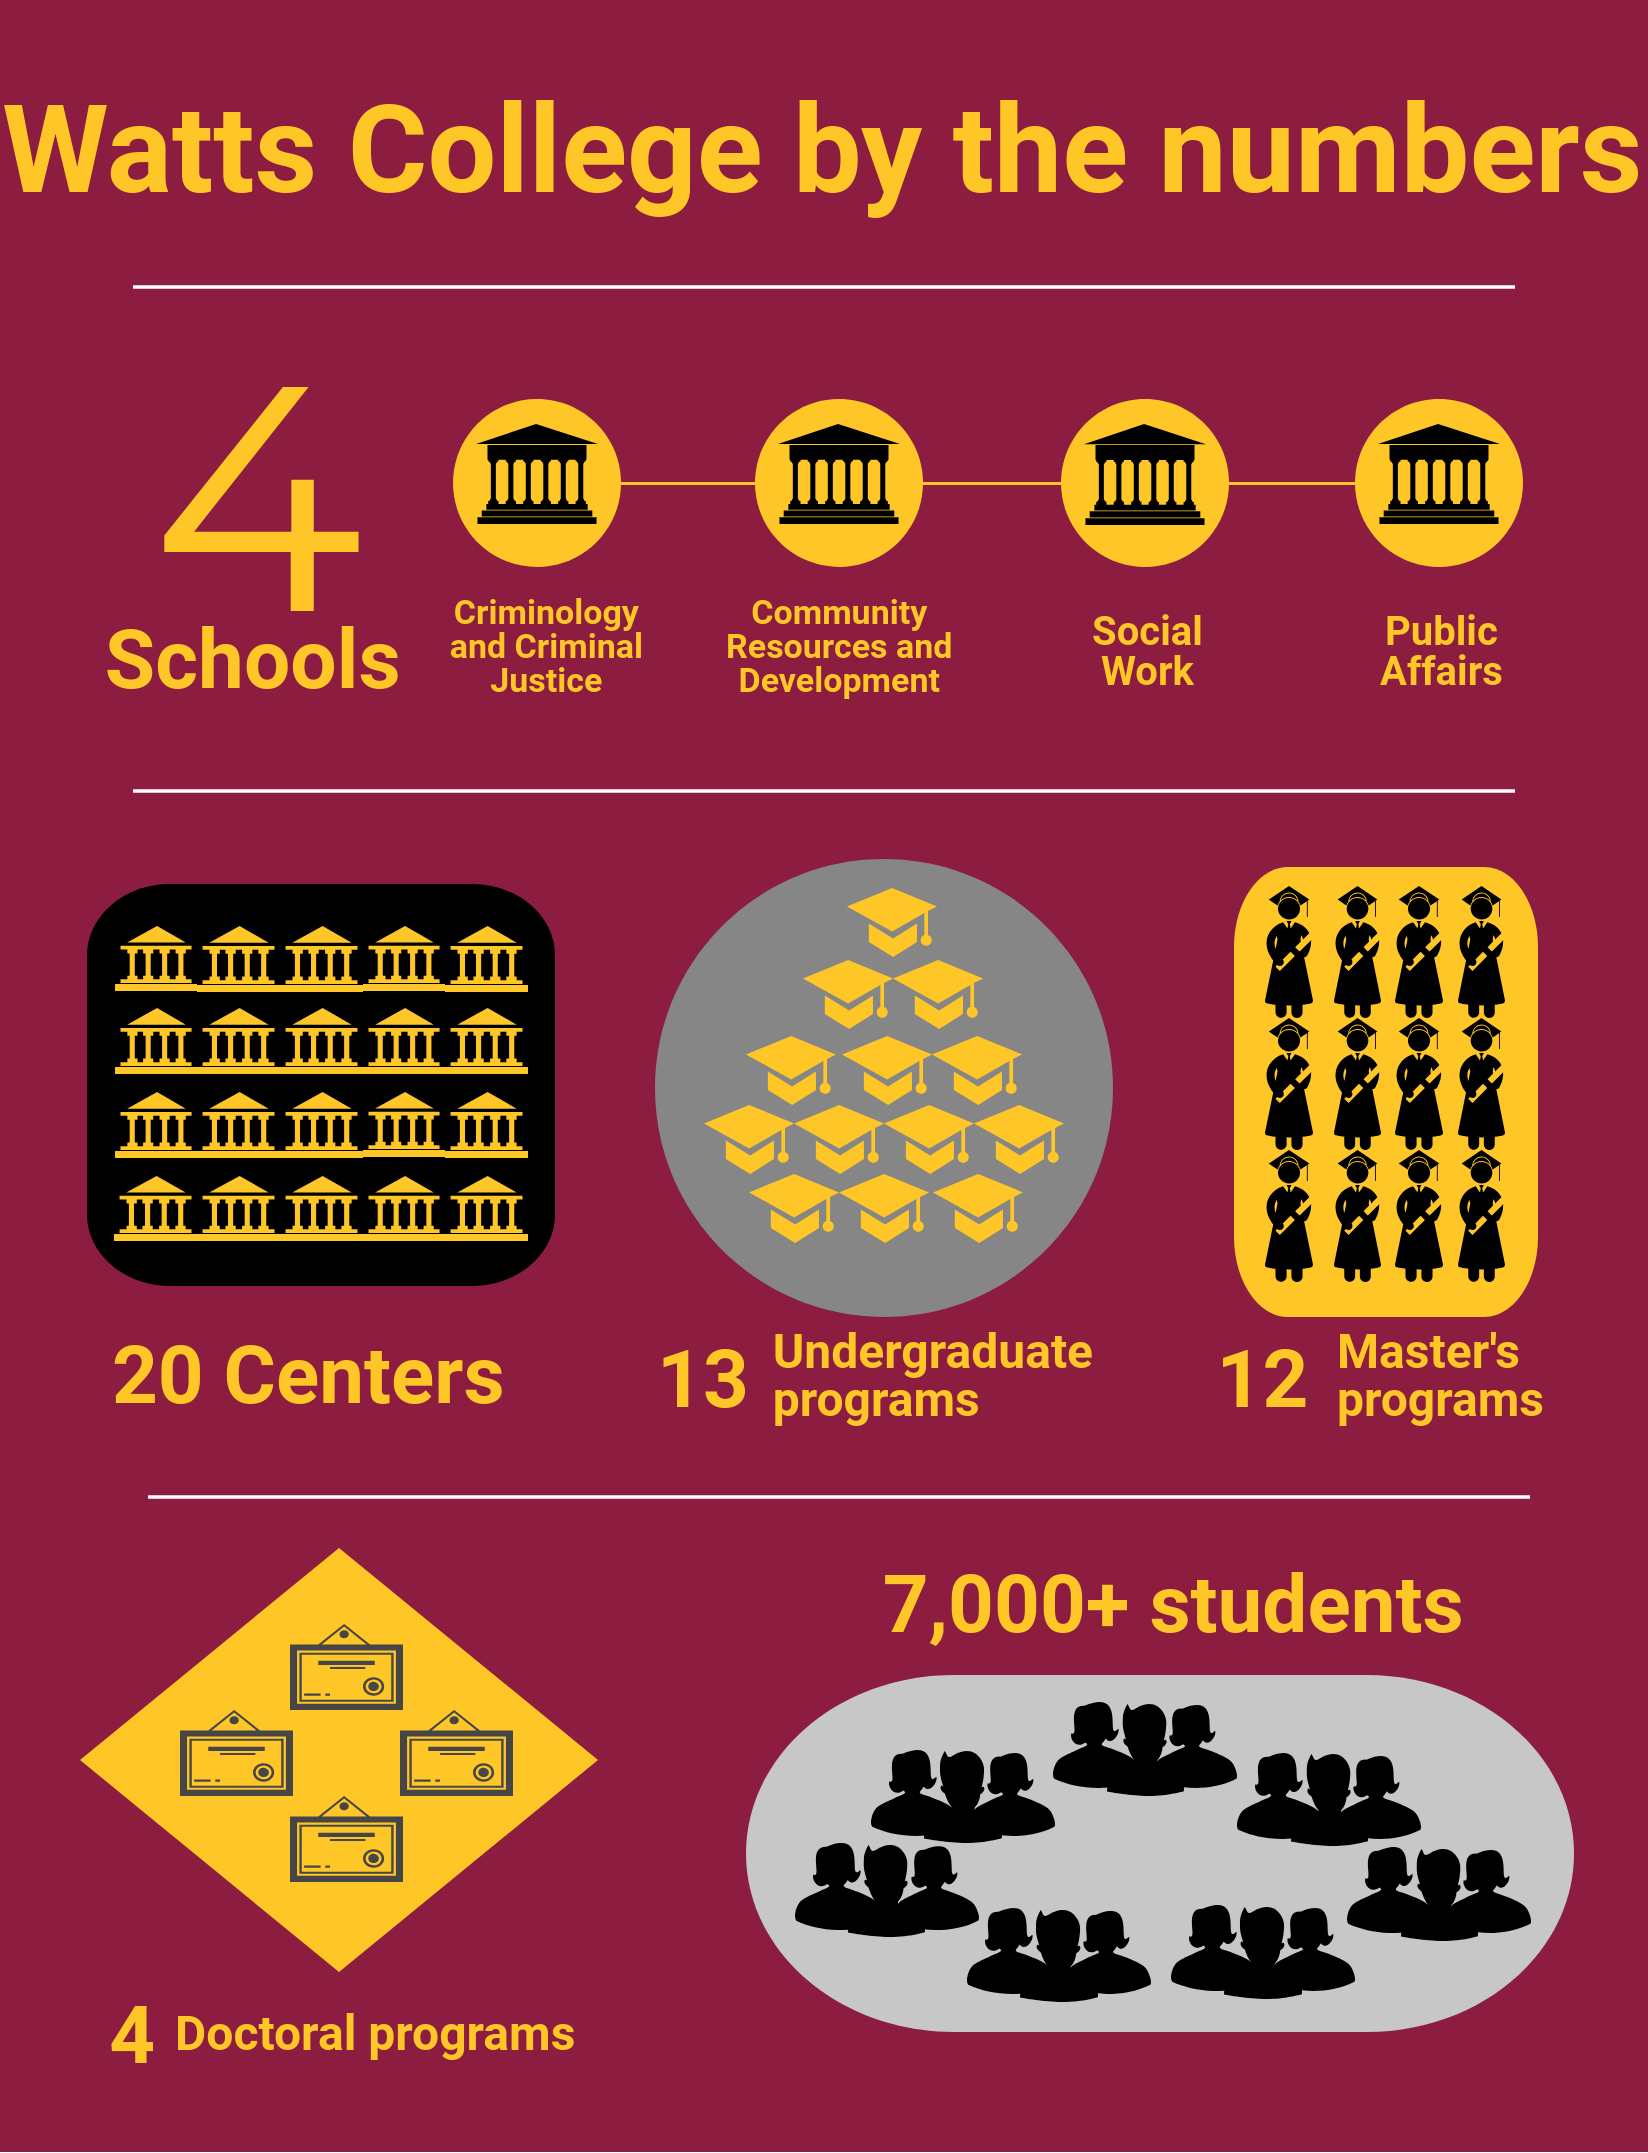 Watts college by the numbers infographic